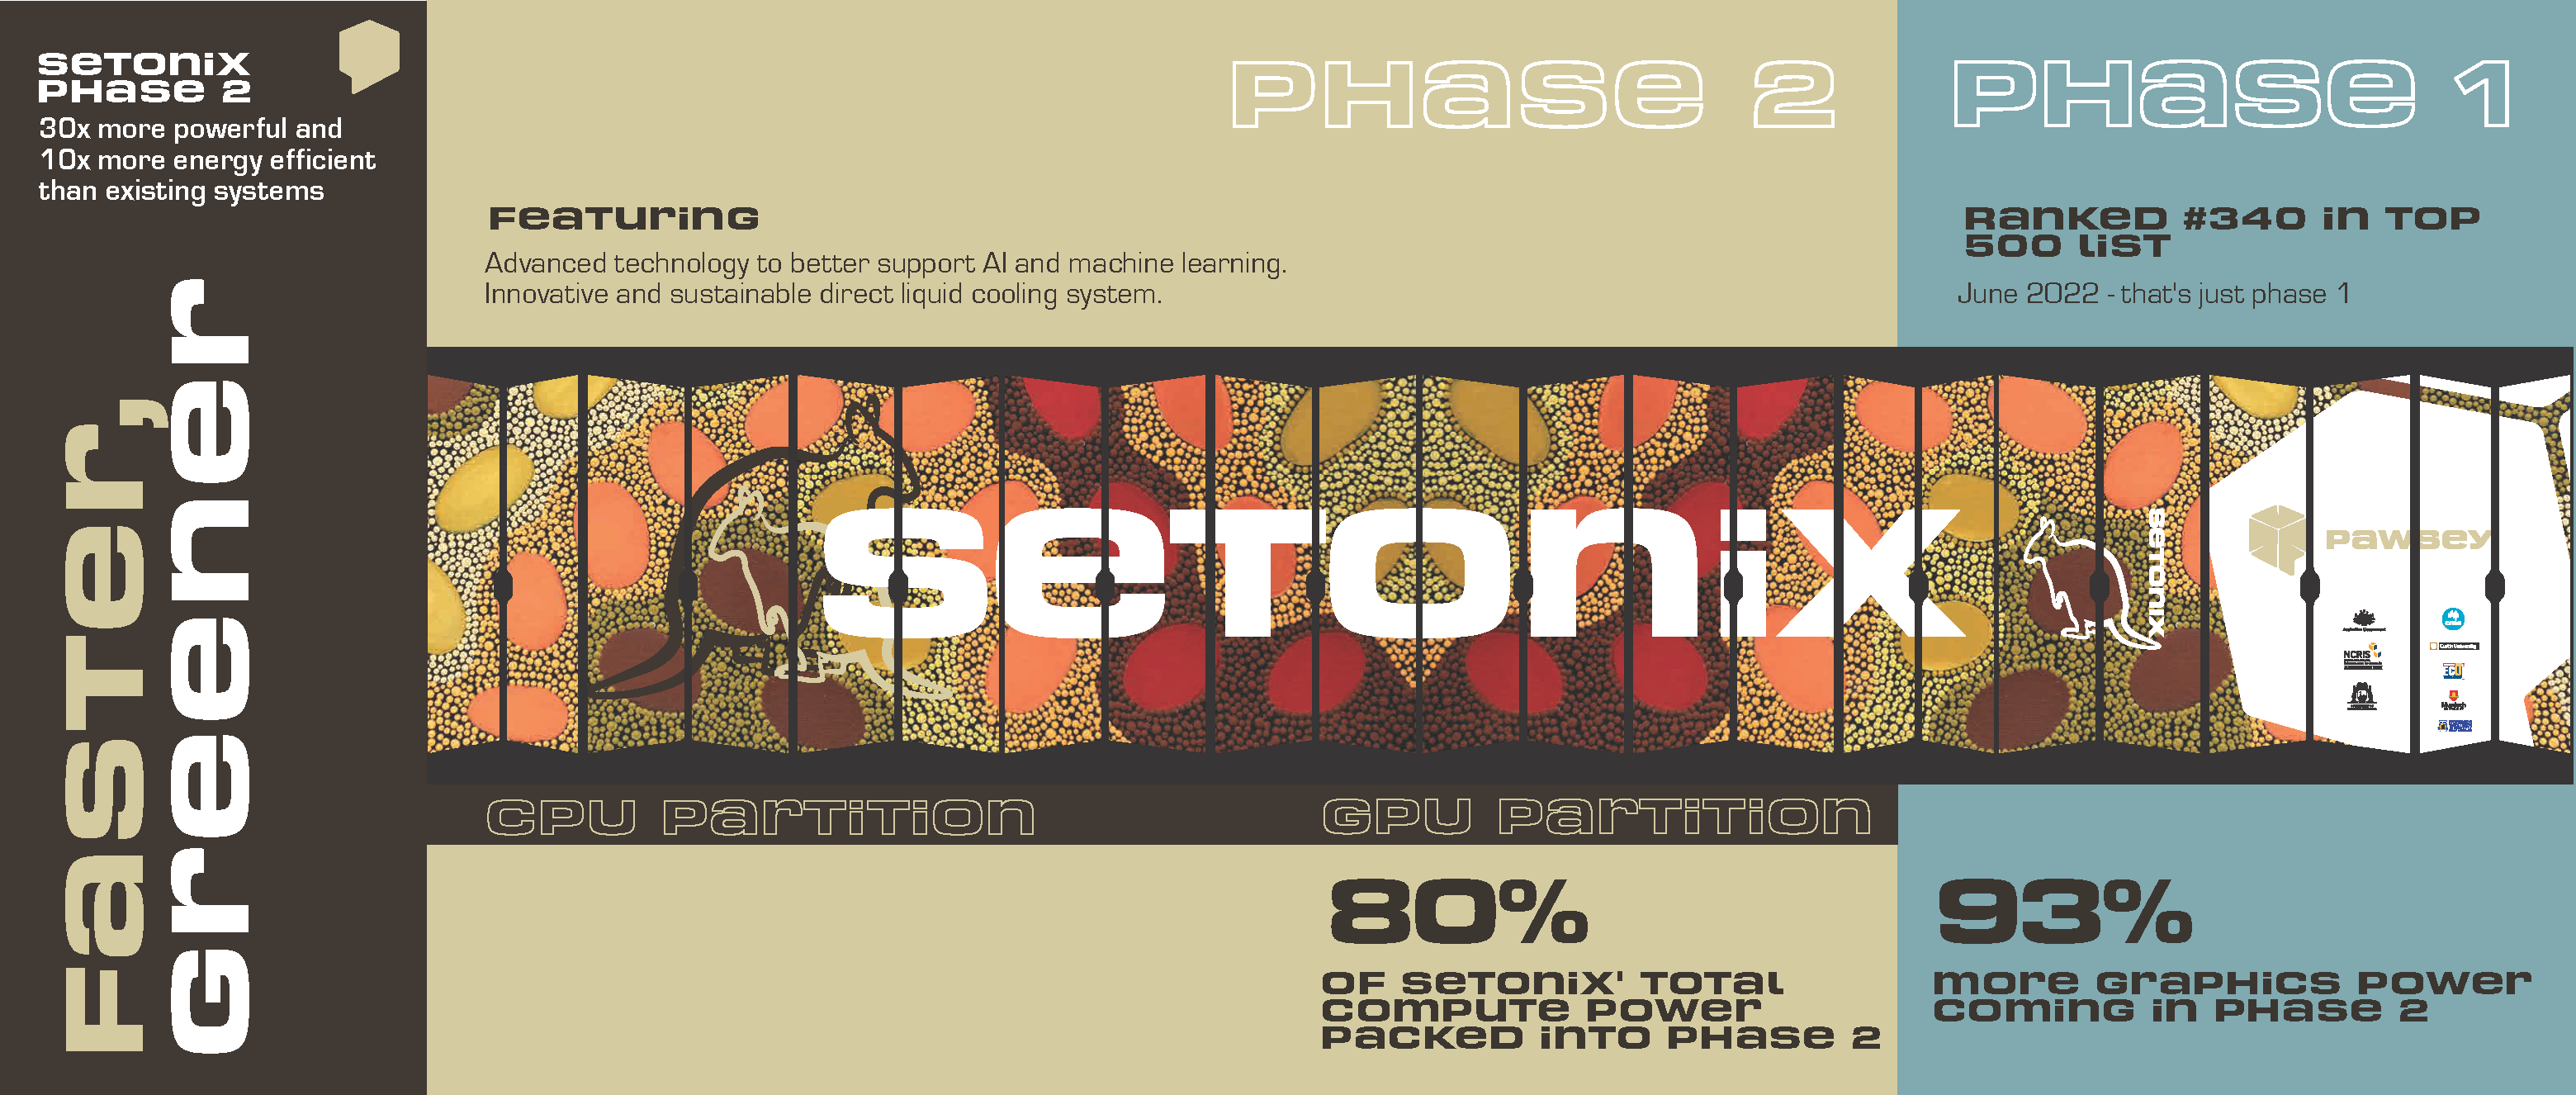 Infographic describing the power of Setonix and comparison among the full system and phase 1